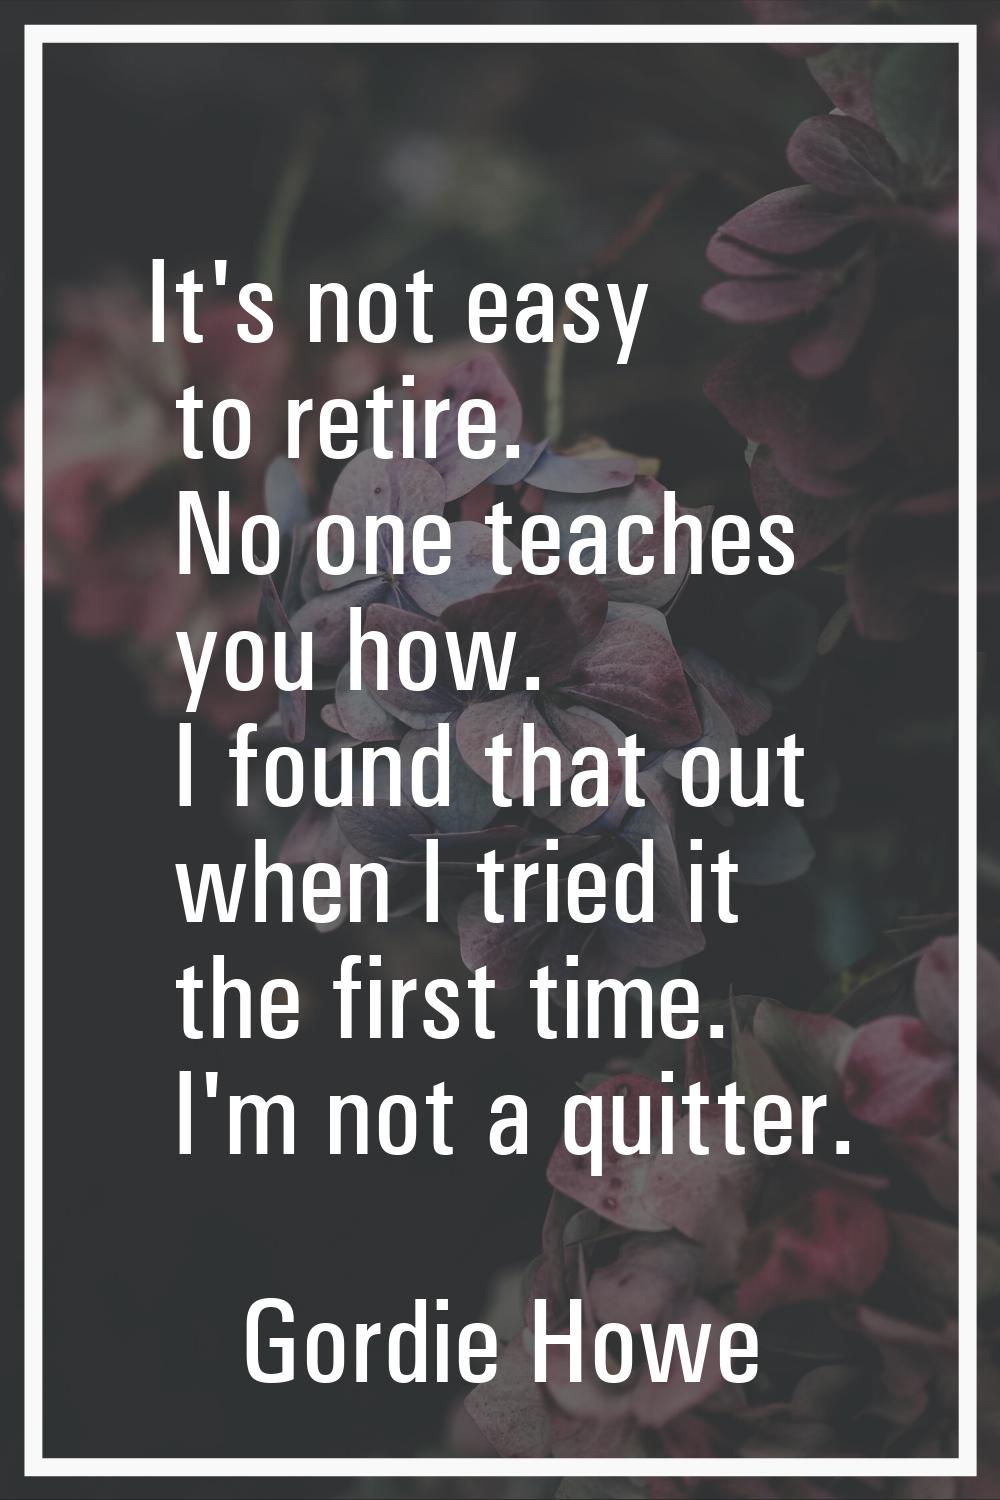 It's not easy to retire. No one teaches you how. I found that out when I tried it the first time. I